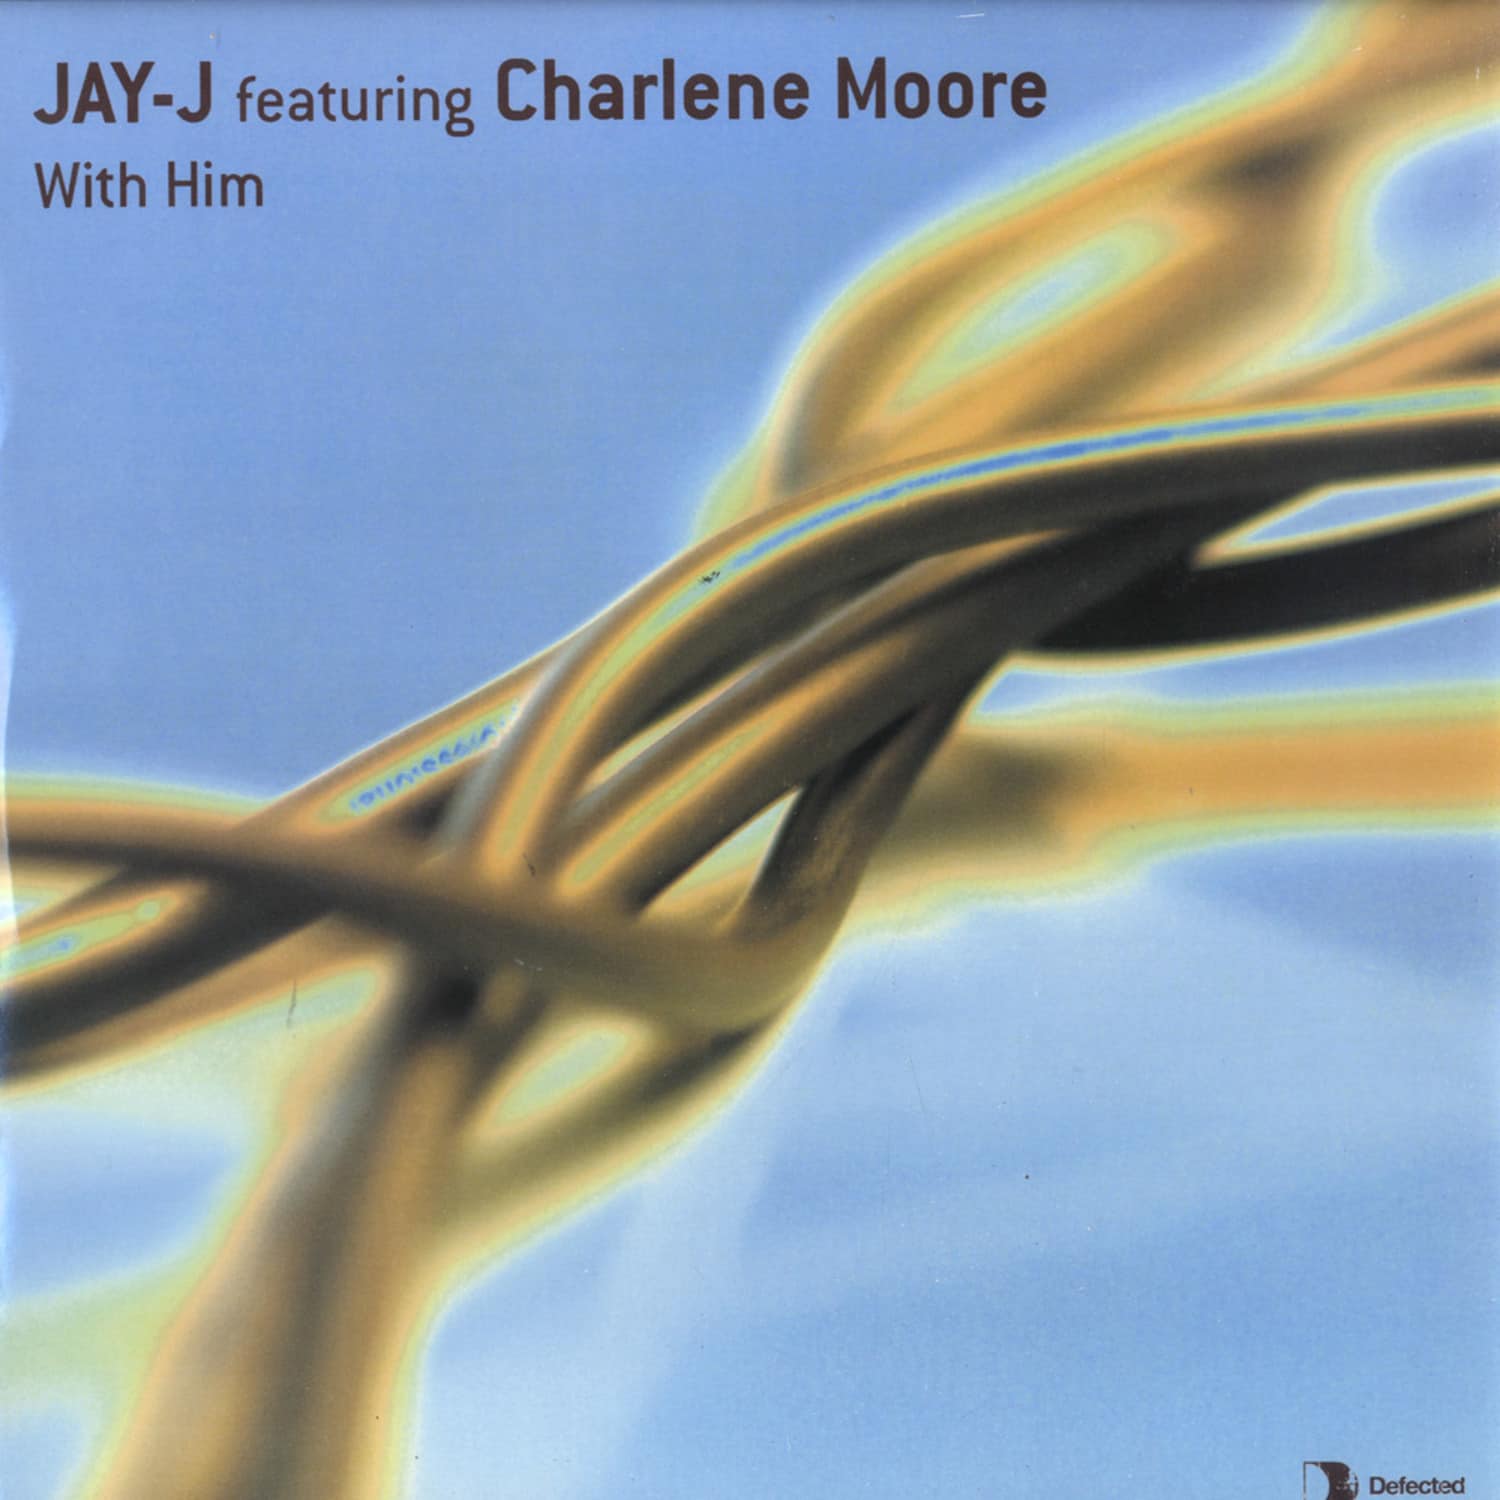 Jay-J featuring Charlene Moore - WITH HIM